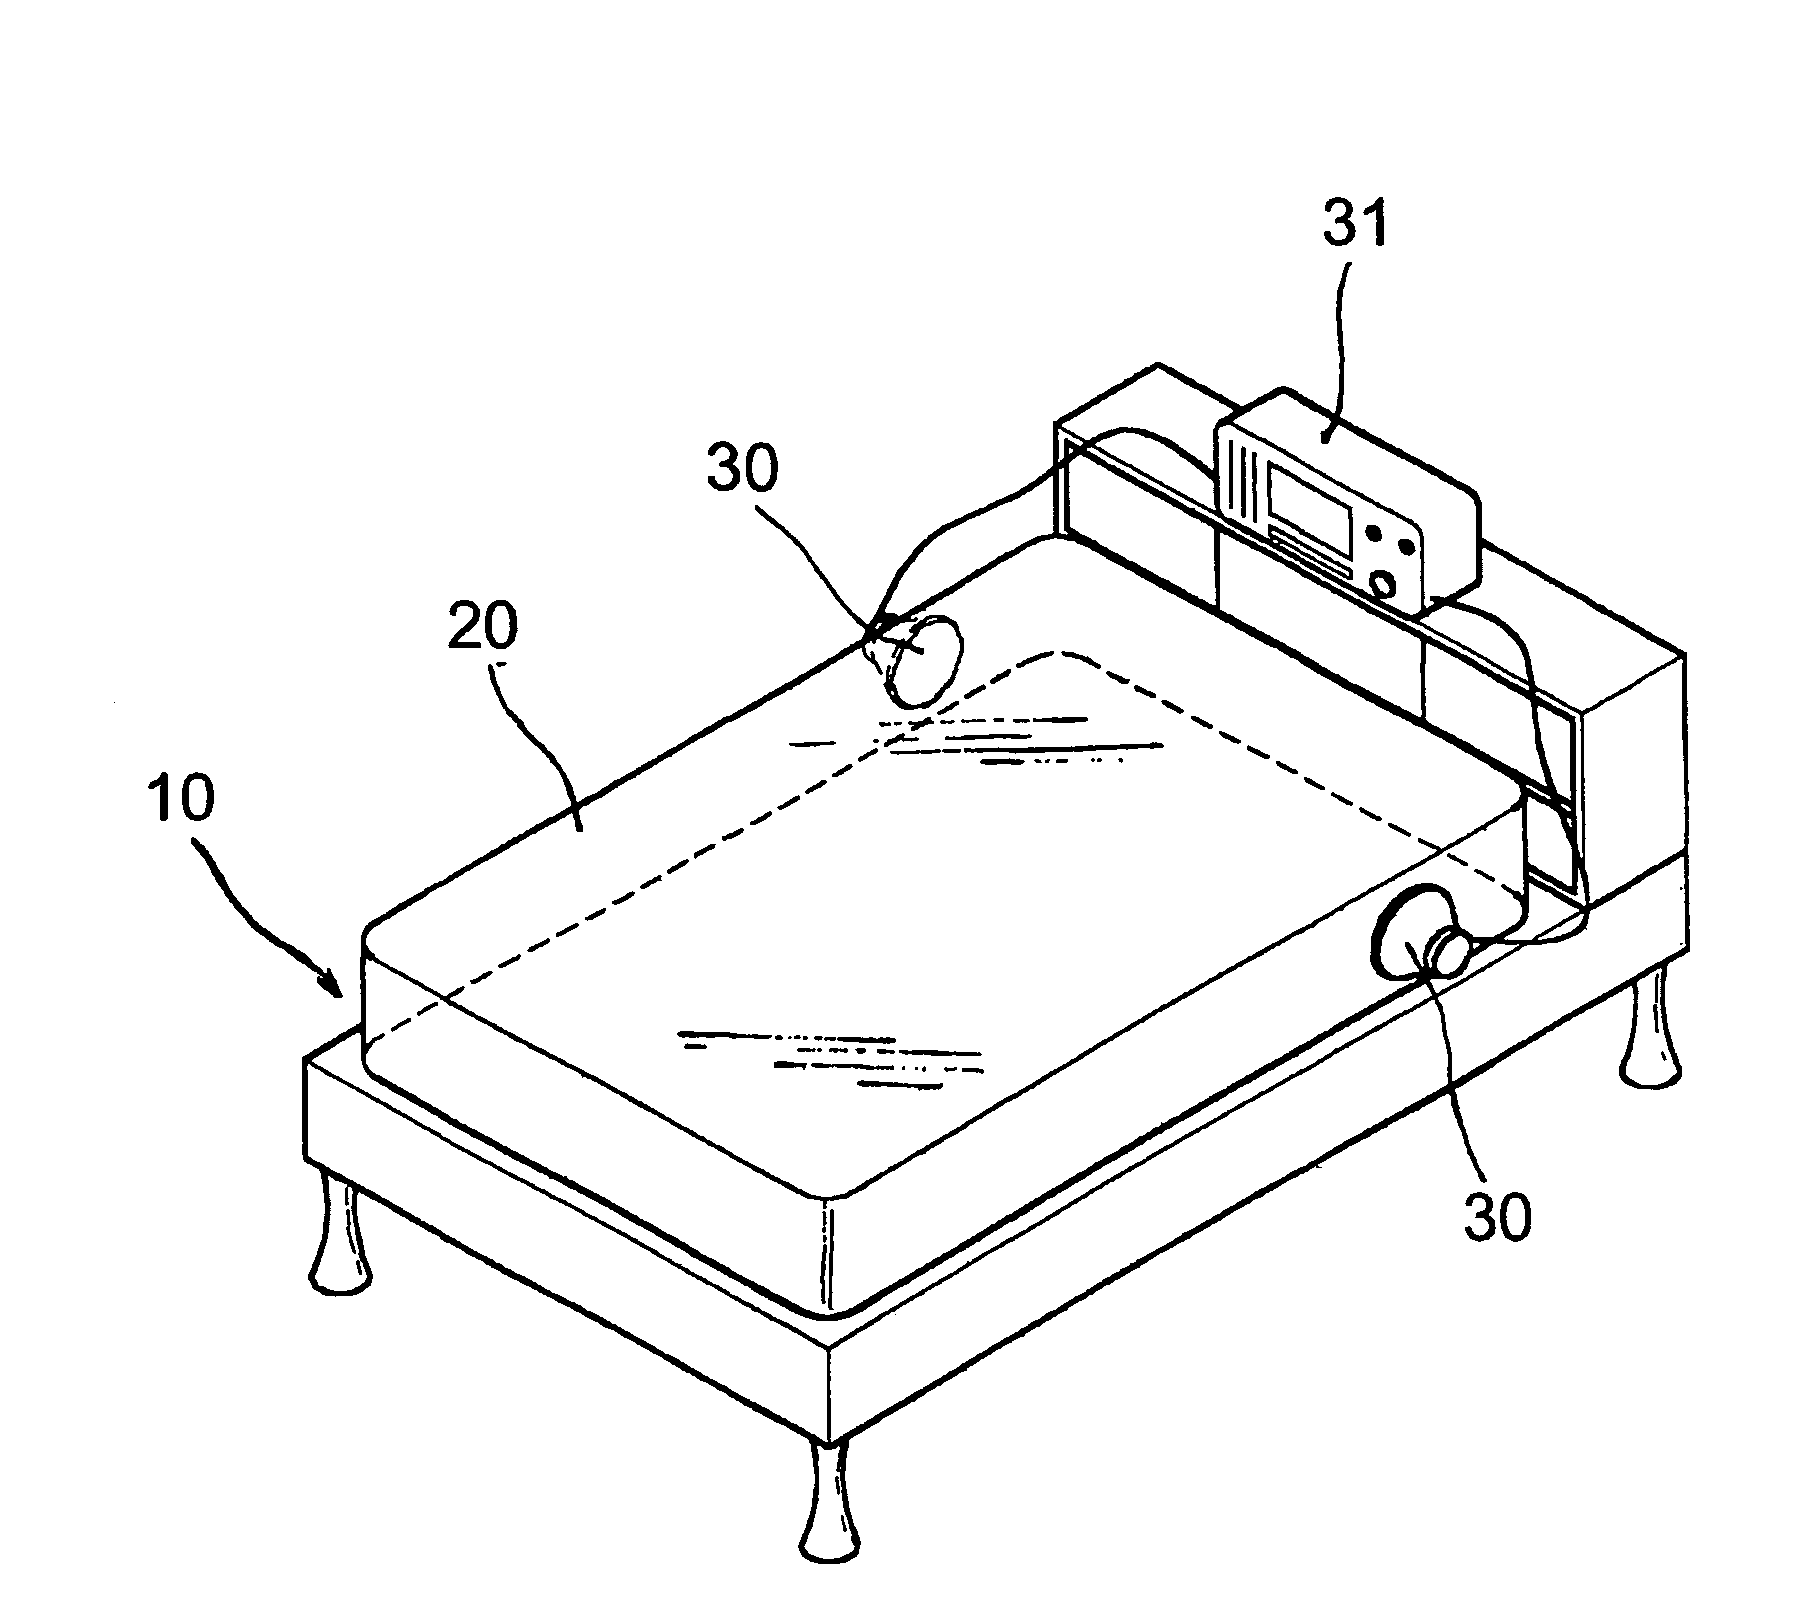 Acoustic vibration system with speaker for air mattresses